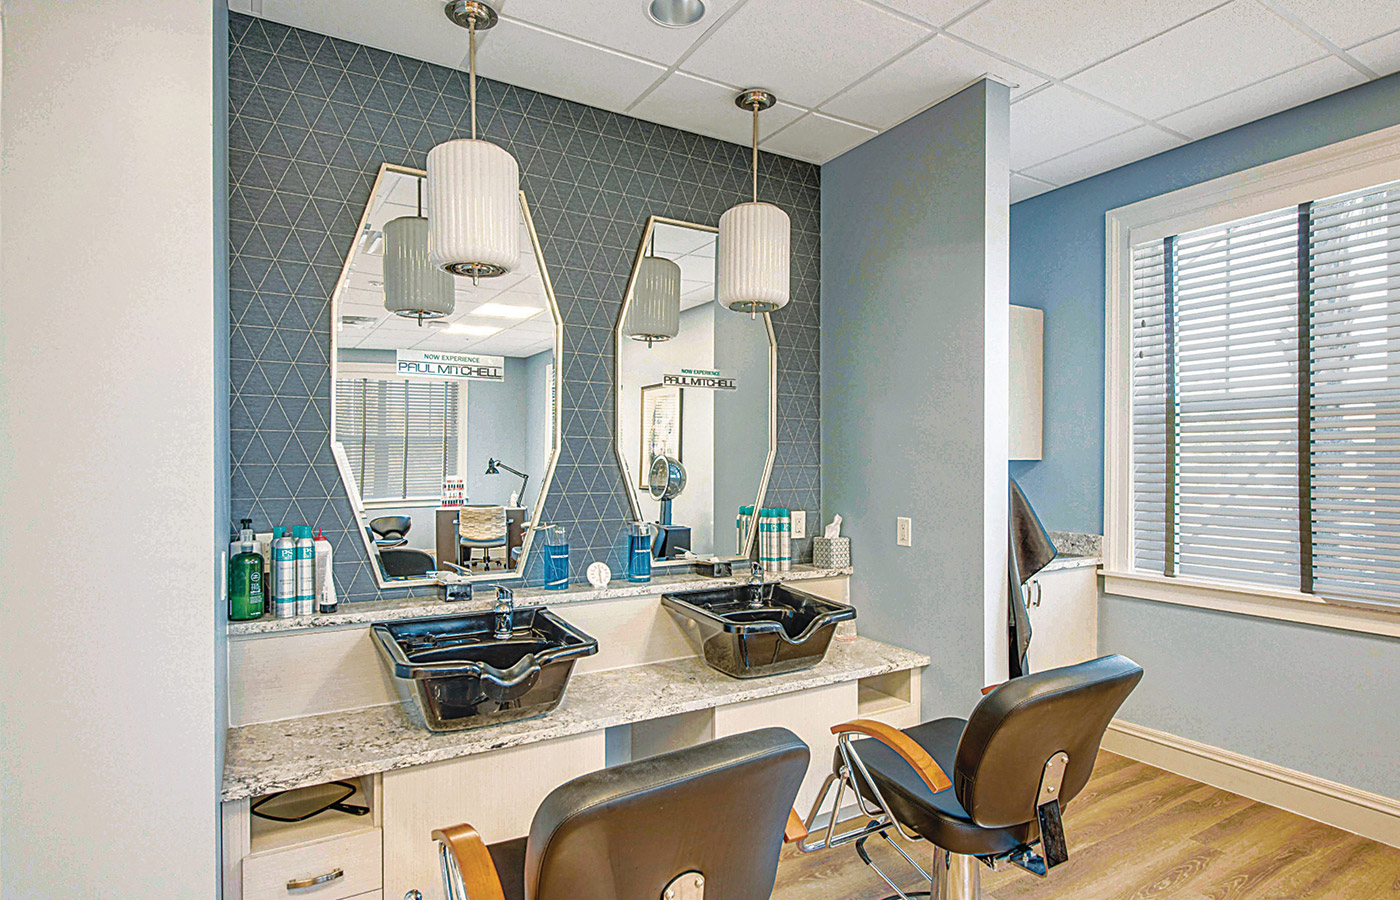 Salon with hair styling stations.